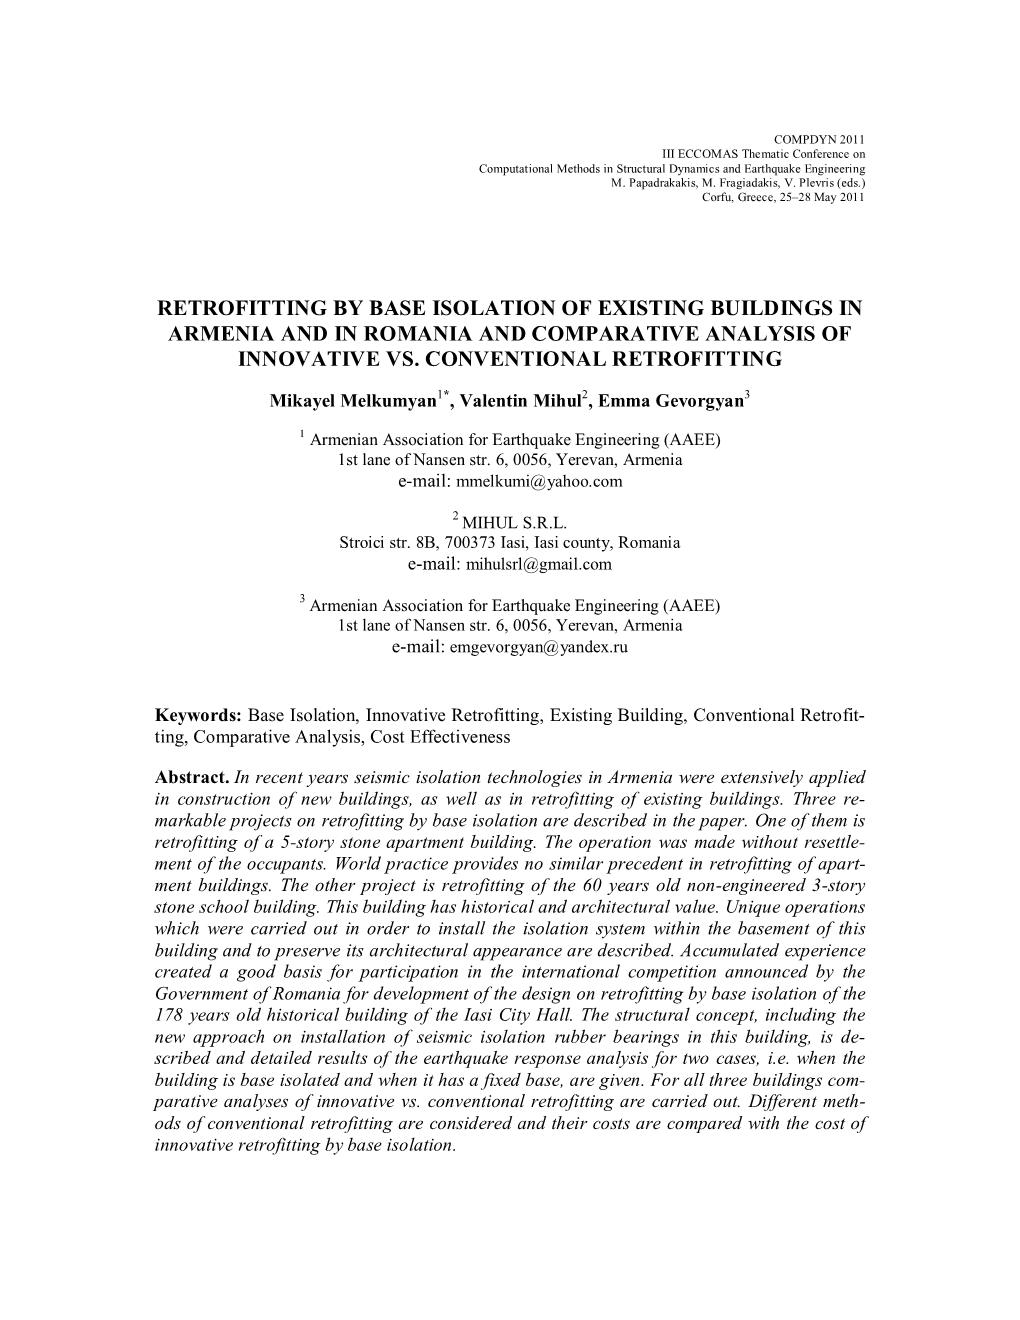 Retrofitting by Base Isolation of Existing Buildings in Armenia and in Romania and Comparative Analysis of Innovative Vs. Conventional Retrofitting